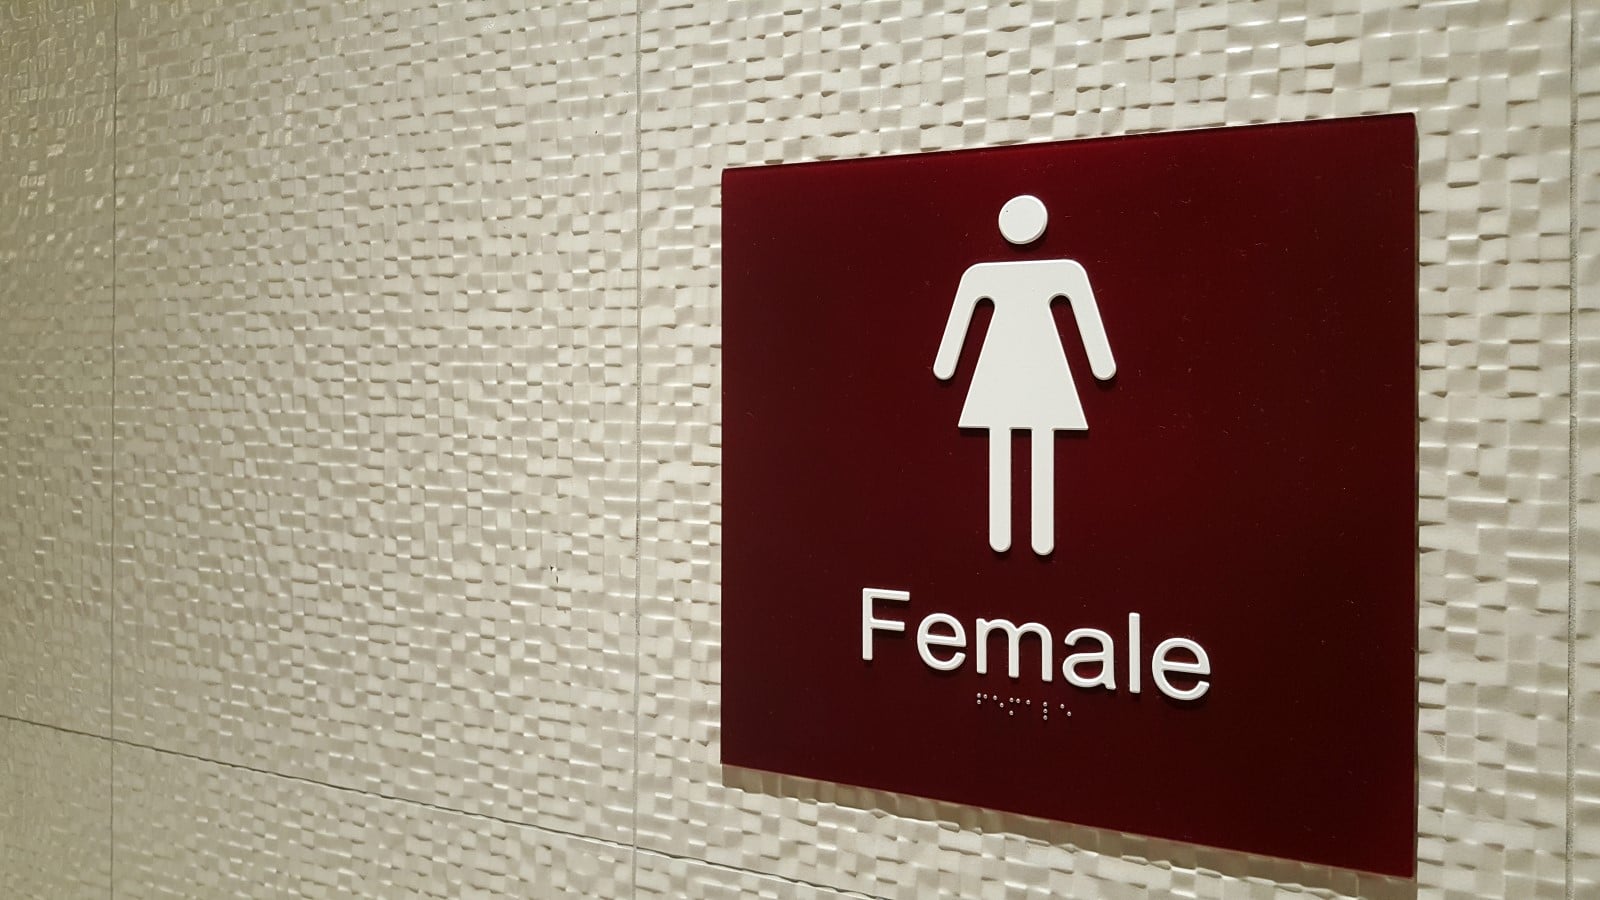 Image Credit: Shutterstock / haireena <p><span>Ah, the great bathroom debate—where signs on doors spark national controversy. Feminists focus on safety and privacy, while transgender advocates fight for the right to pee in peace. Architects everywhere are scratching their heads.</span></p>